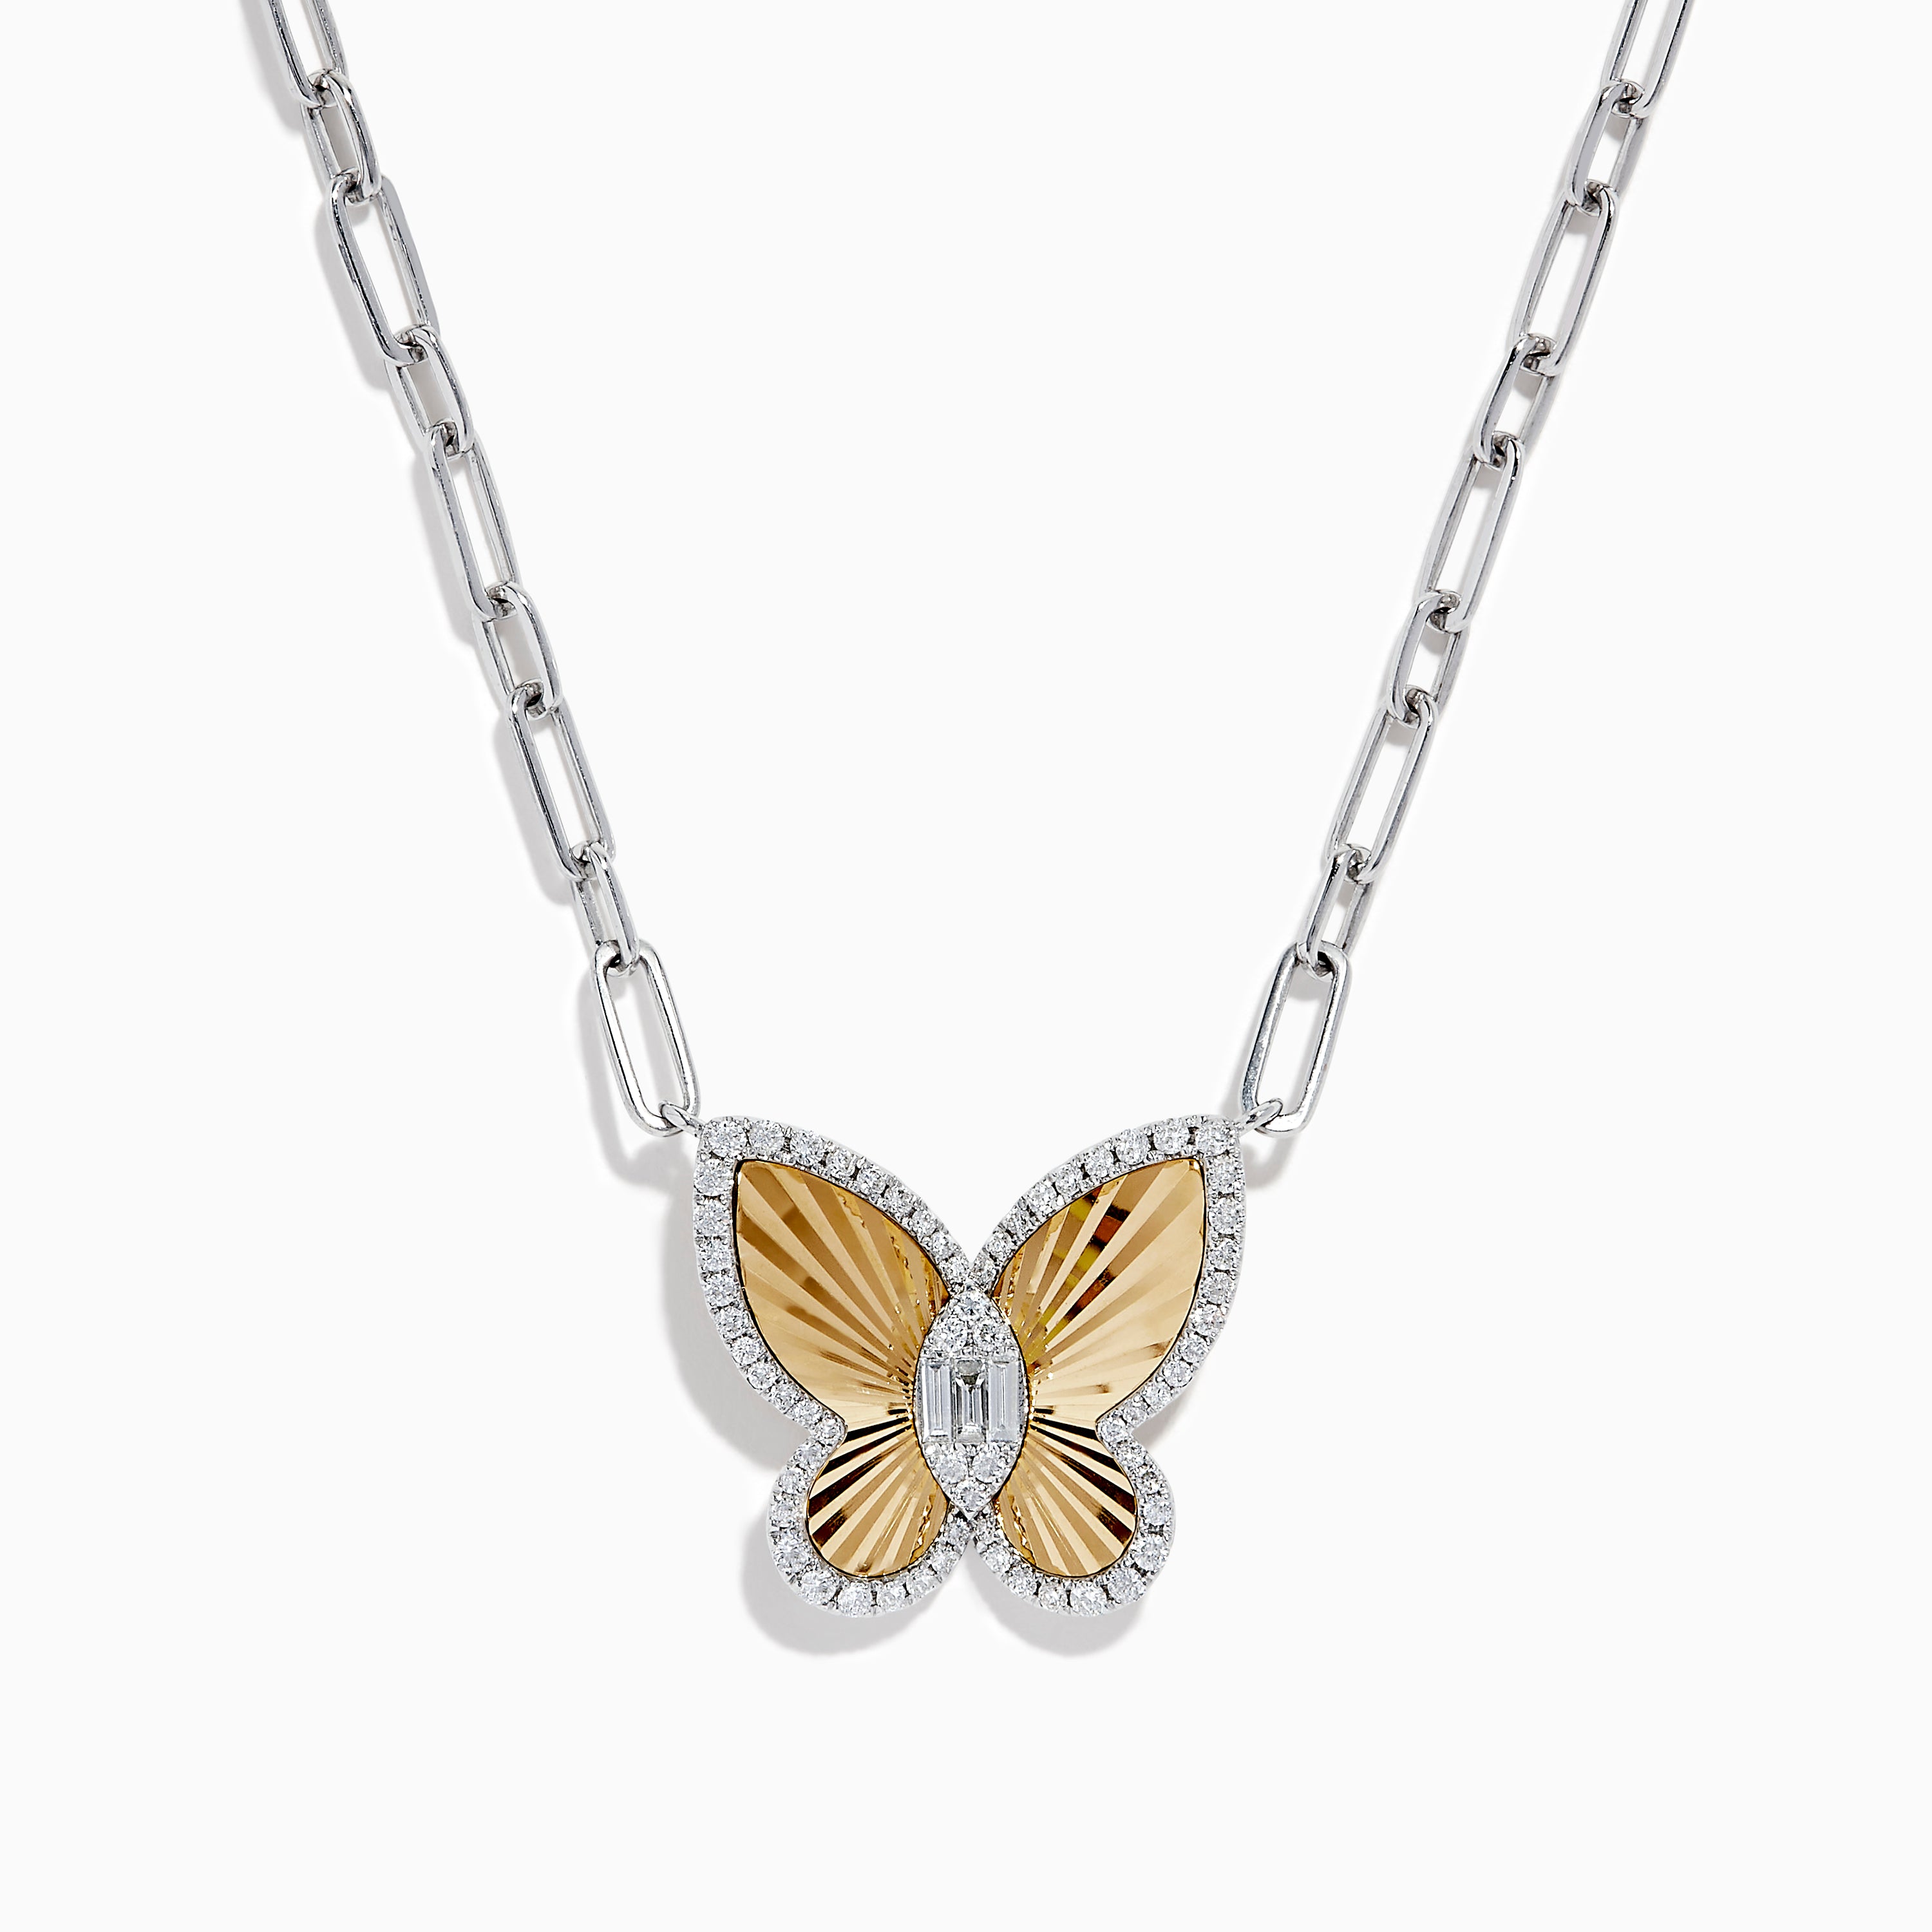 Buy Diamond Butterfly Pendant Necklace, Marquise Butterfly Chain Necklace,  Ag925 Sterling Silver 18k White Gold, Butterfly Necklace Choker Online in  India - Etsy